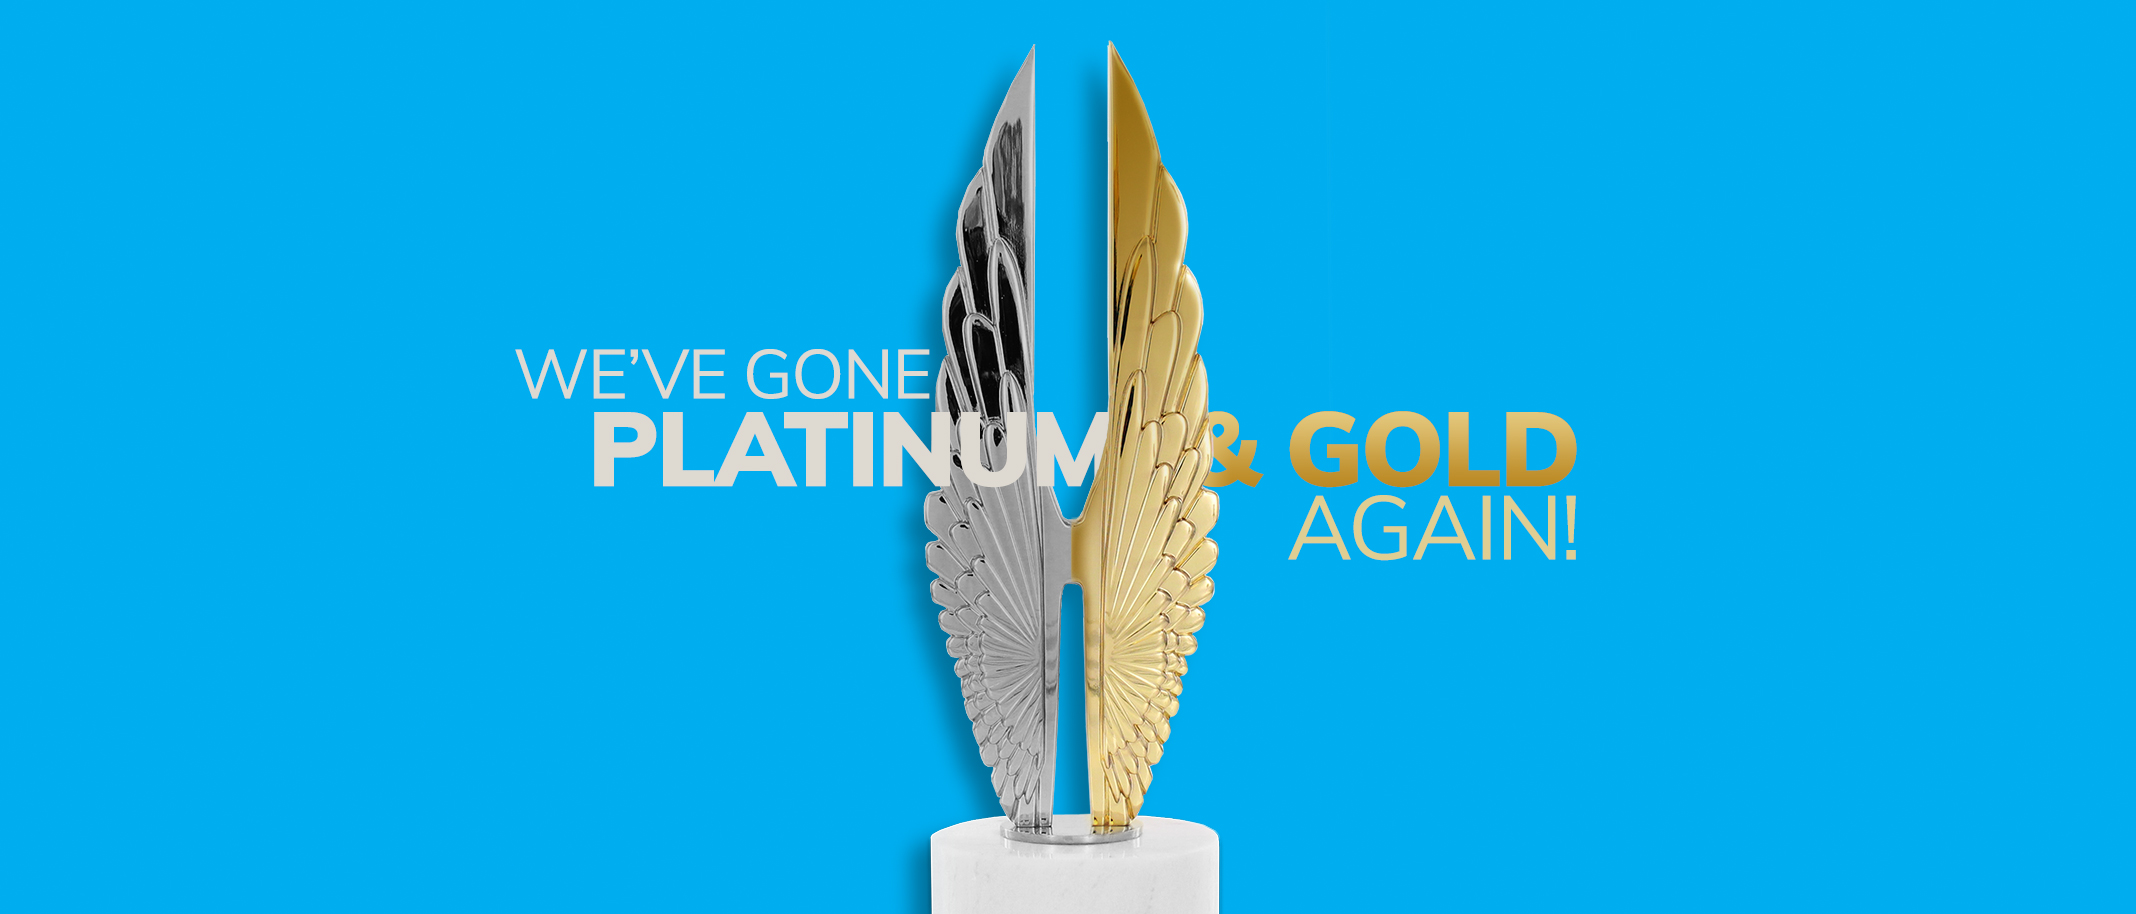 Liquified Creative was awarded six Hermes Awards for recent creative and digital projects.